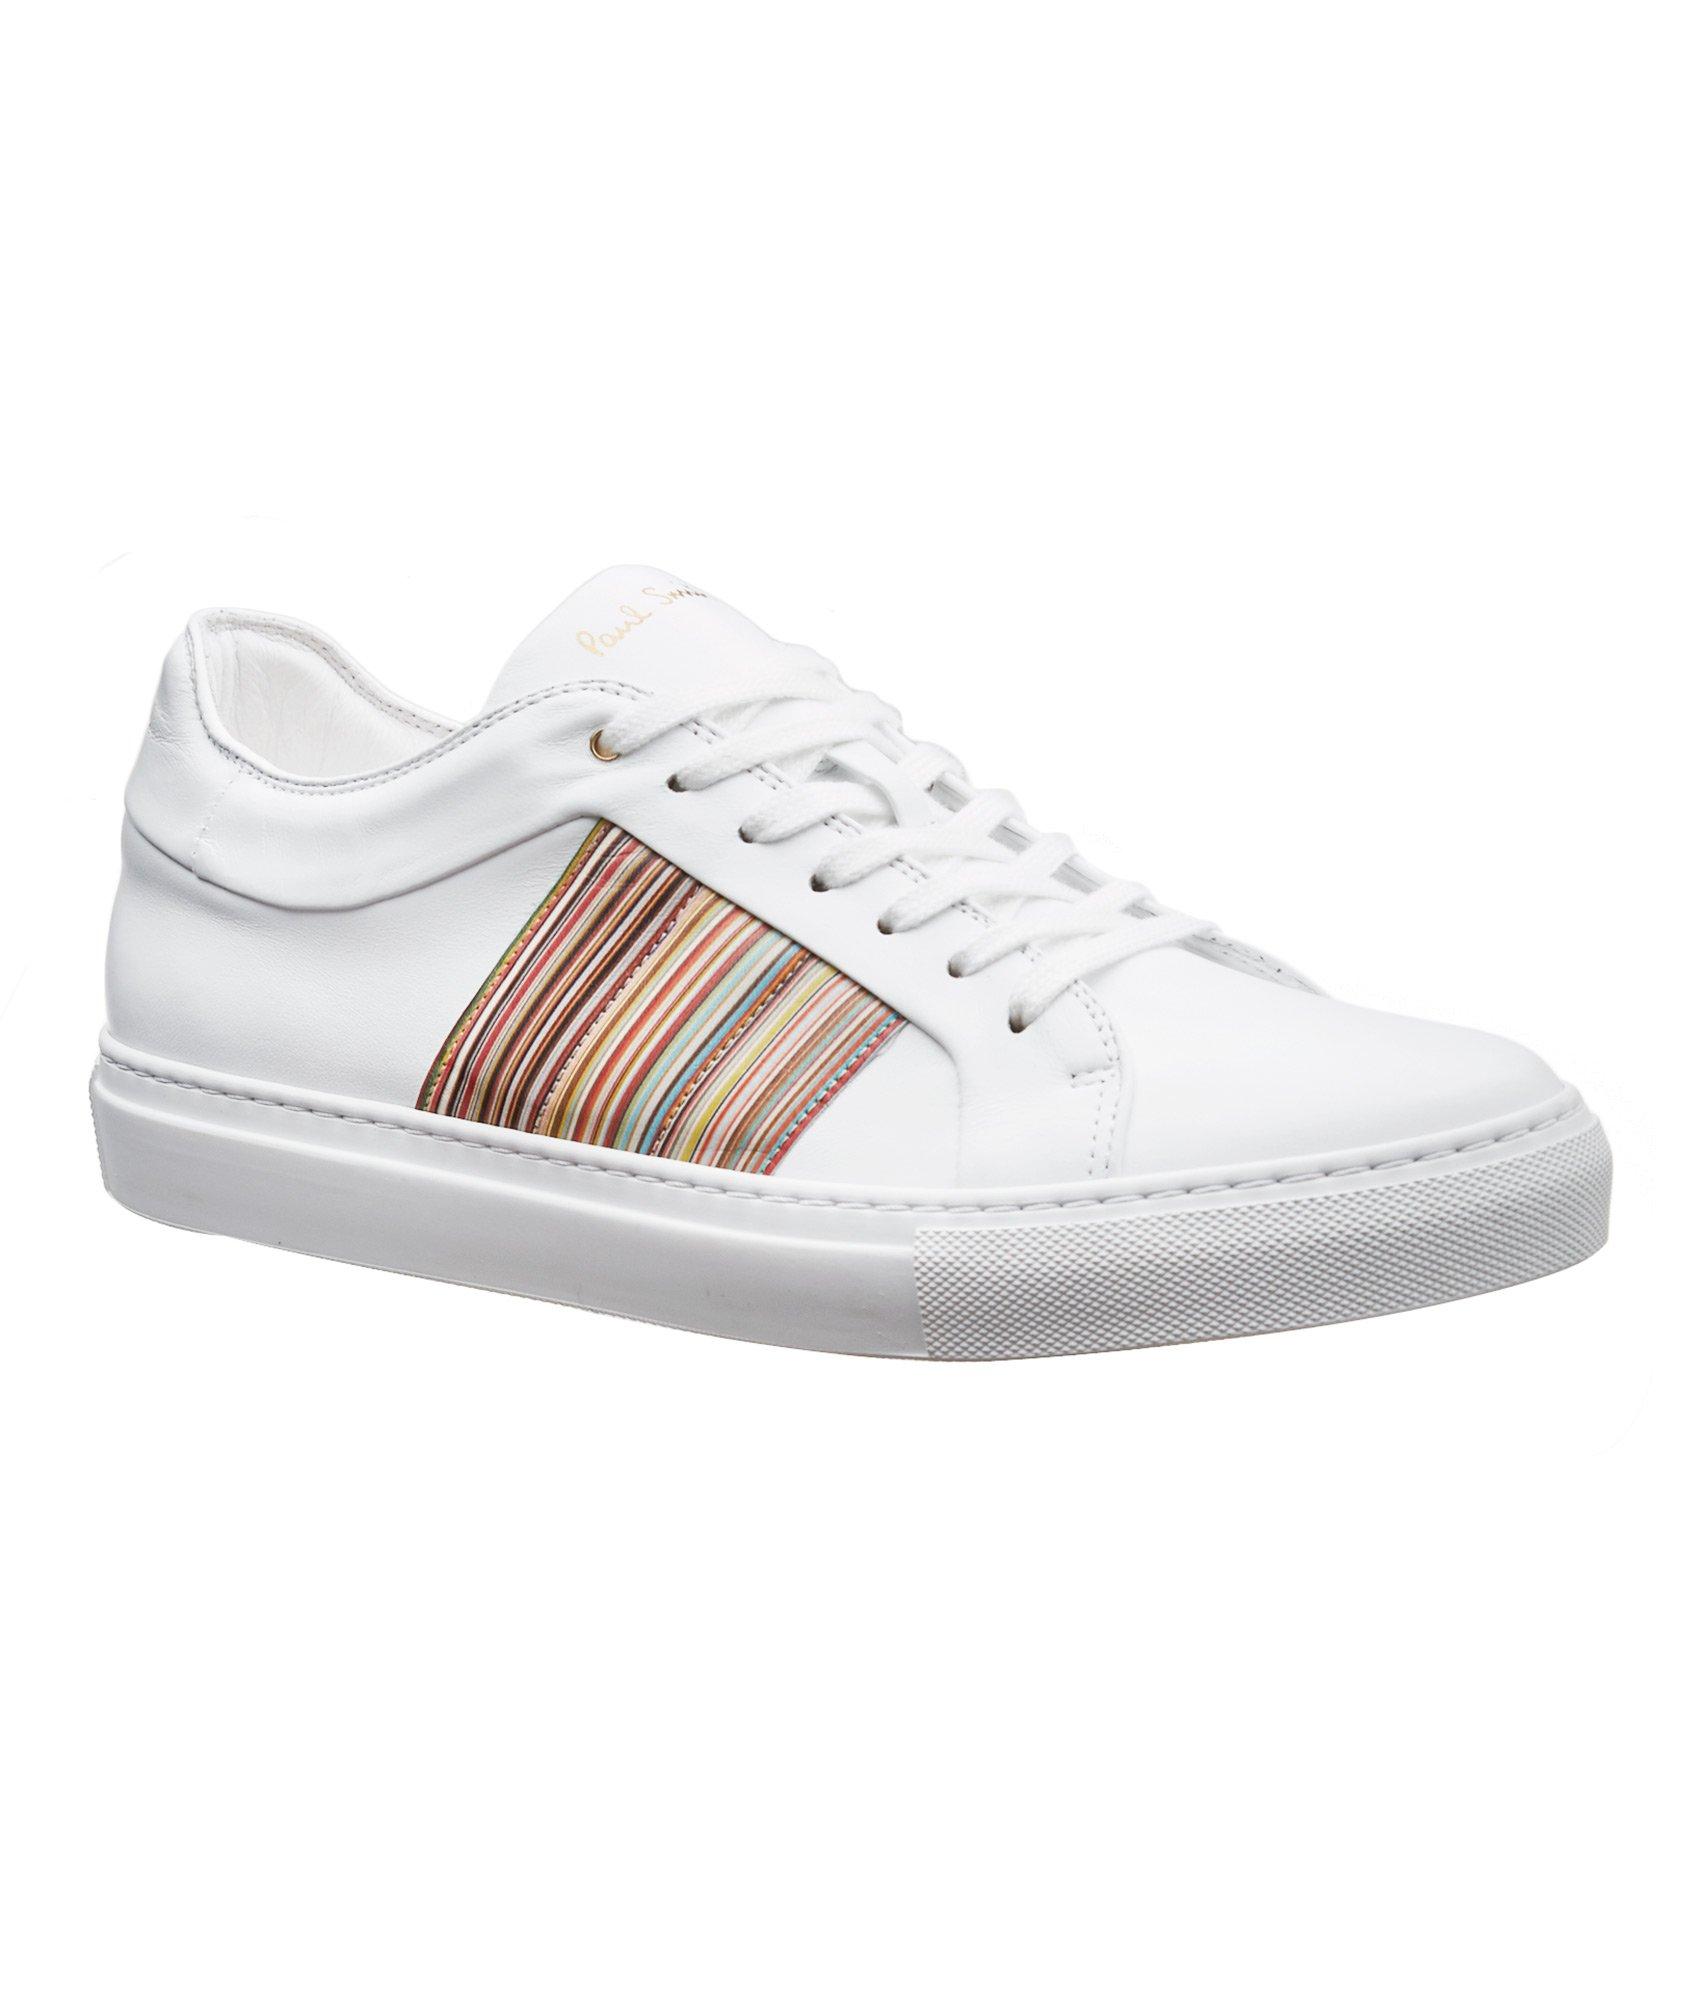 Striped Leather Low-Tops image 0